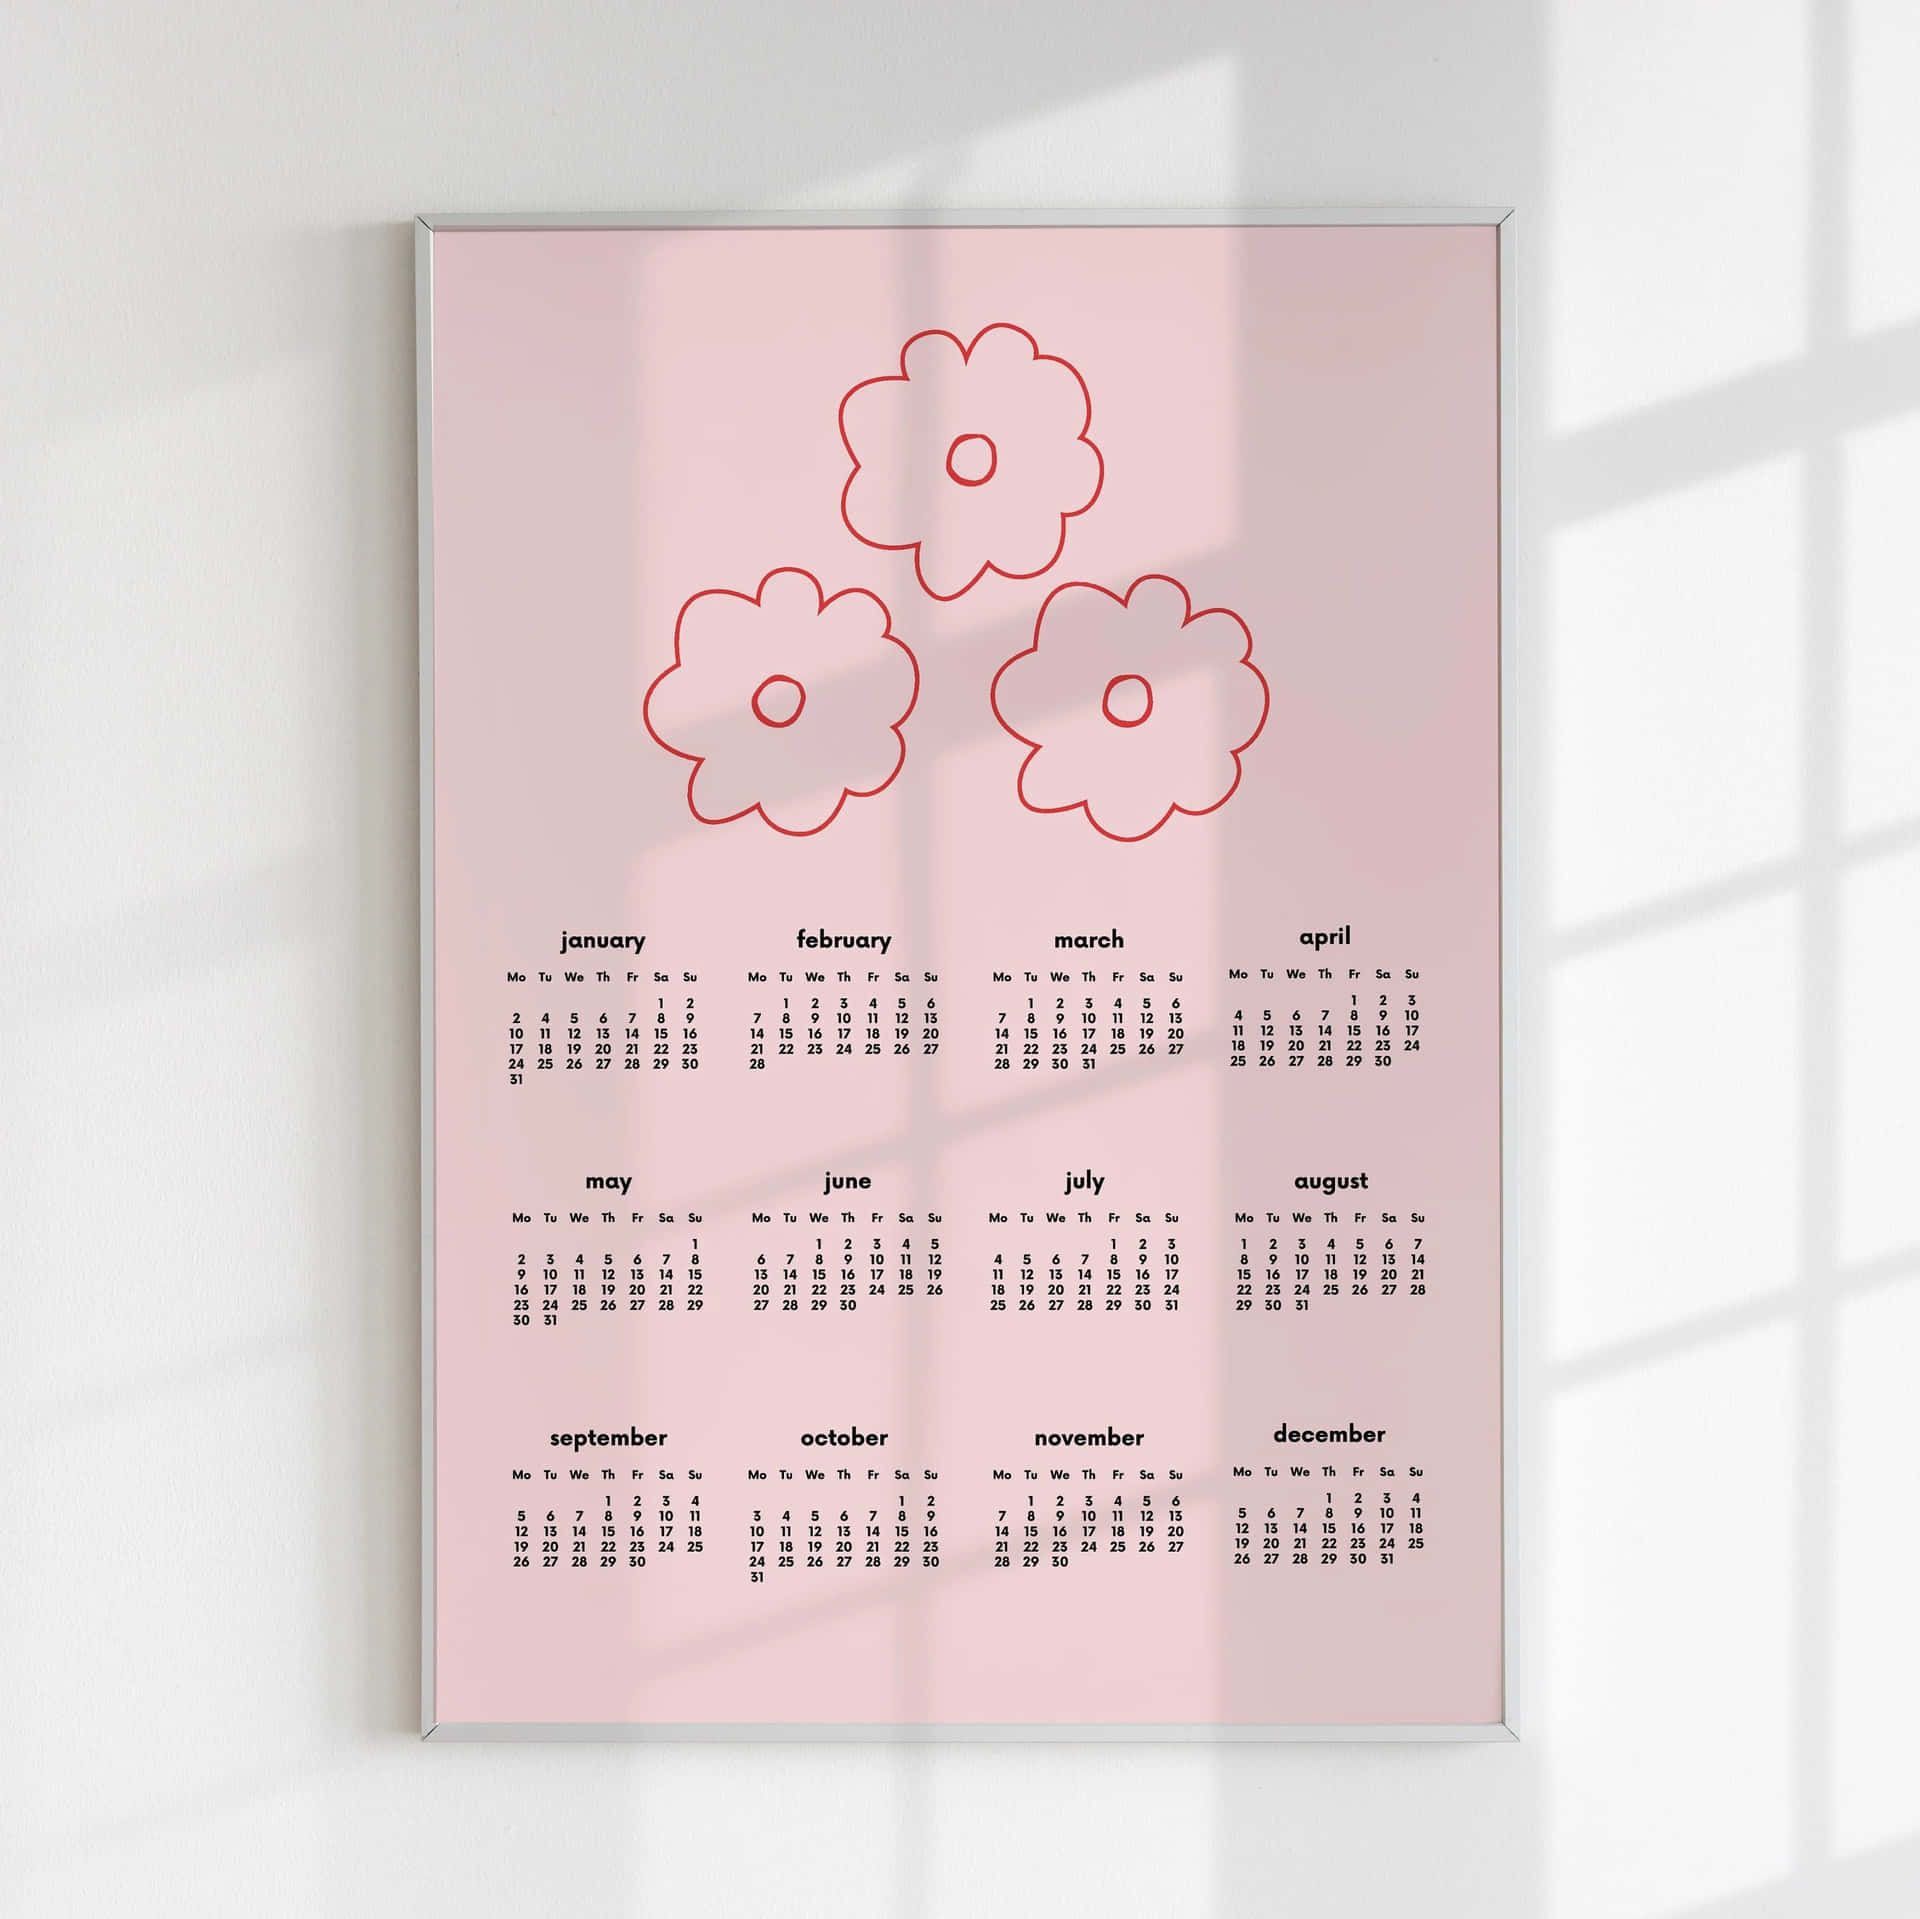 A Pink Calendar With Flowers On It